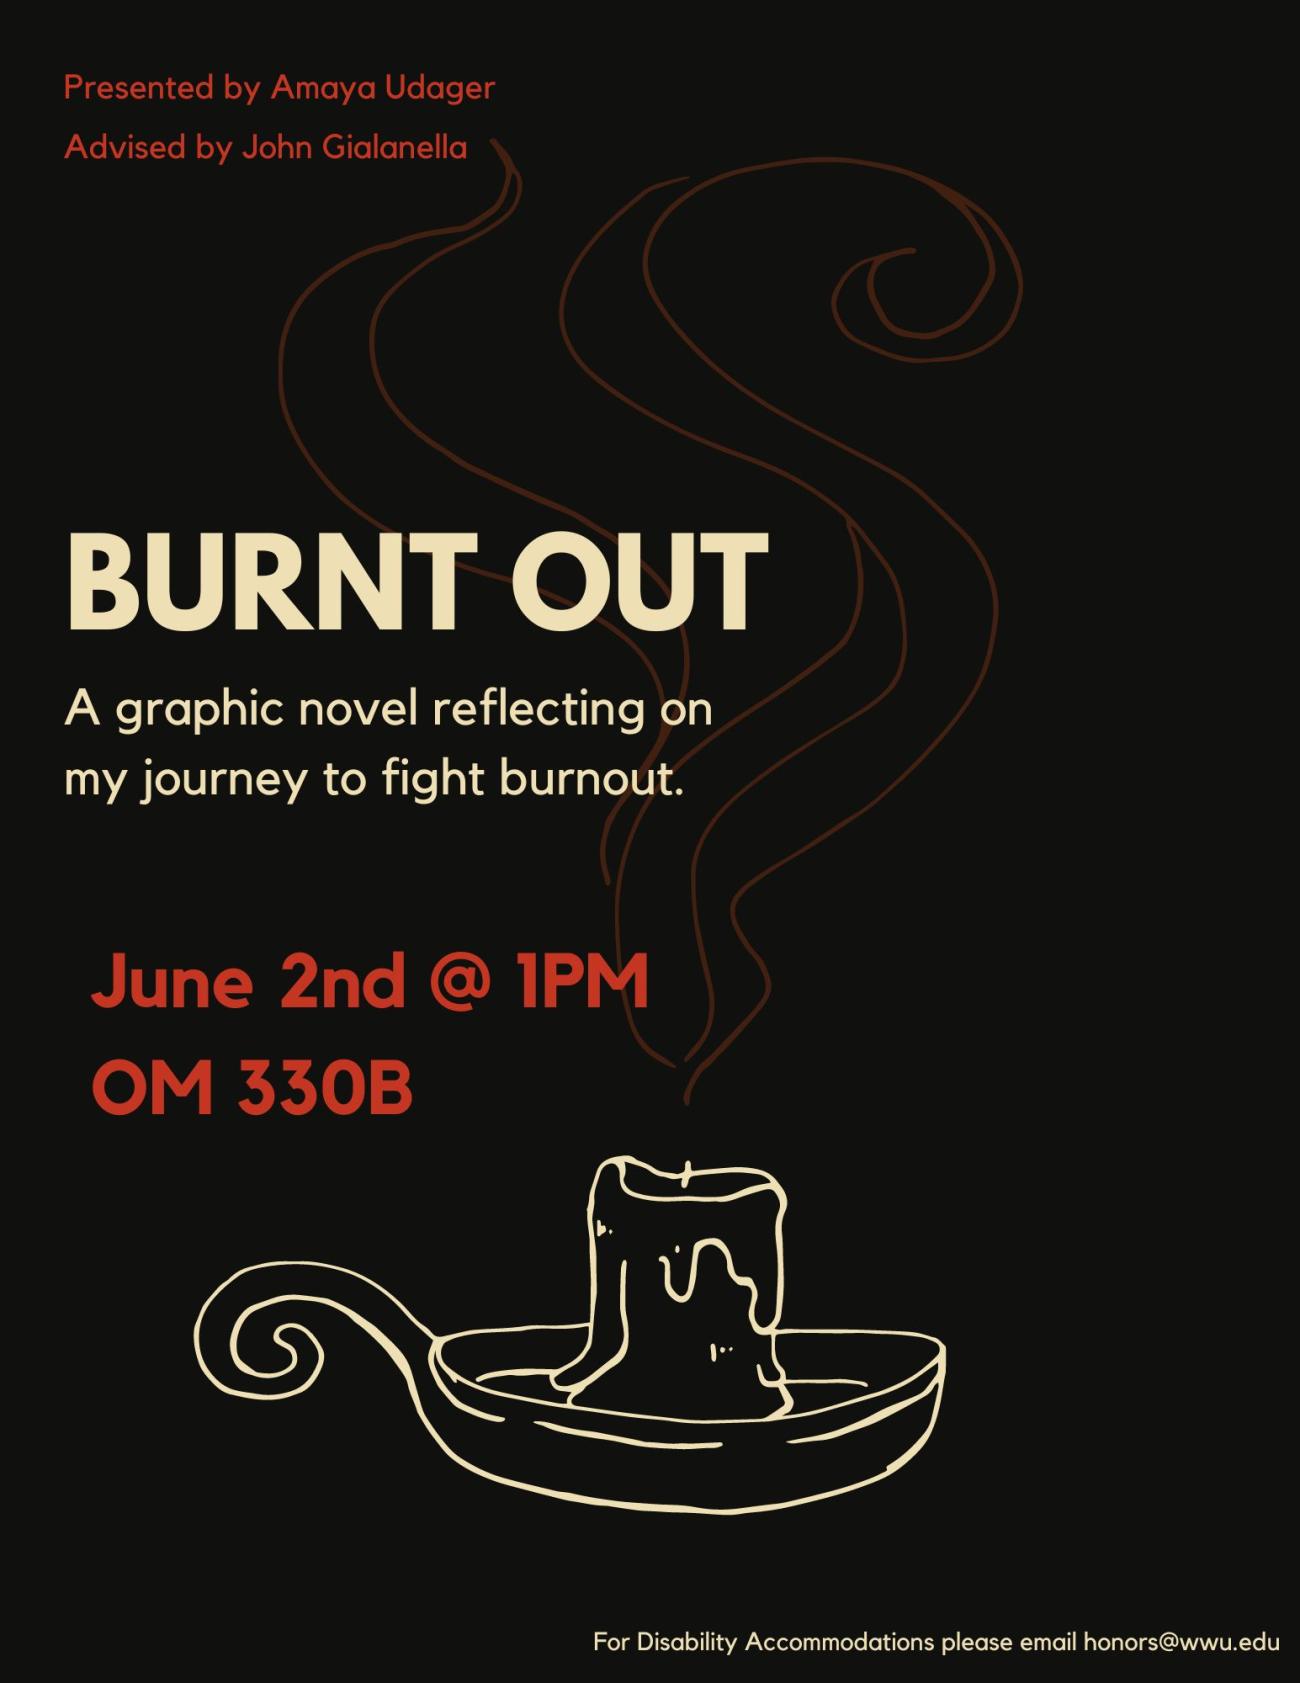 A poster with a black background featuring a melted candle in a candle holder from which smoke is faintly rising. In large letters the title reads "Burn Out: A graphic novel reflecting on my journey to fight burnout. Presented by Amaya Udager. Advised by John Gialanella. The presentation will take place on June 2nd, at 1:00 PM in OM 330B. For Disability Accommodations please email honors@wwu.edu."